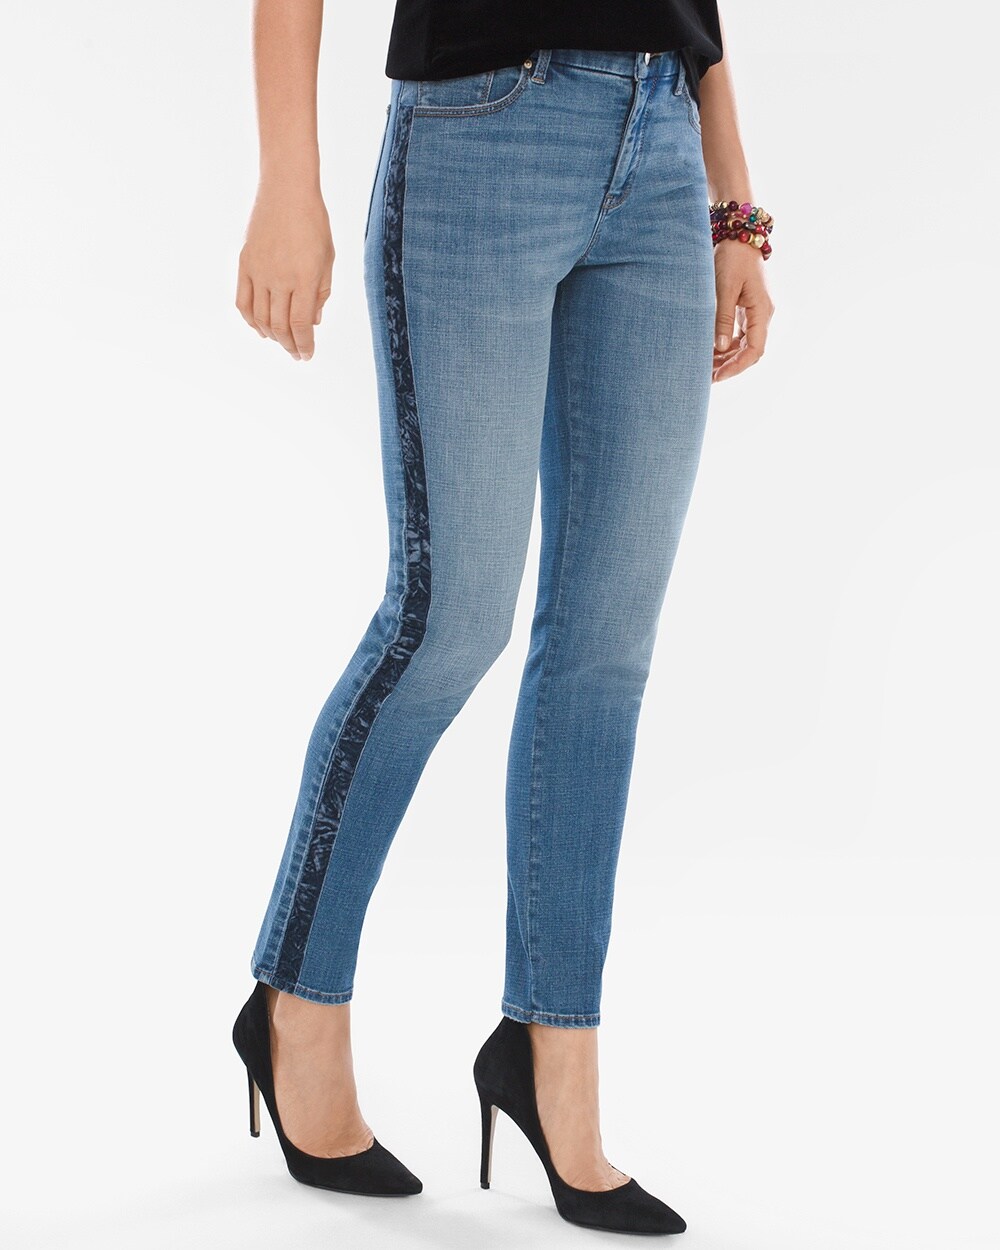 chico's so slimming girlfriend jeans